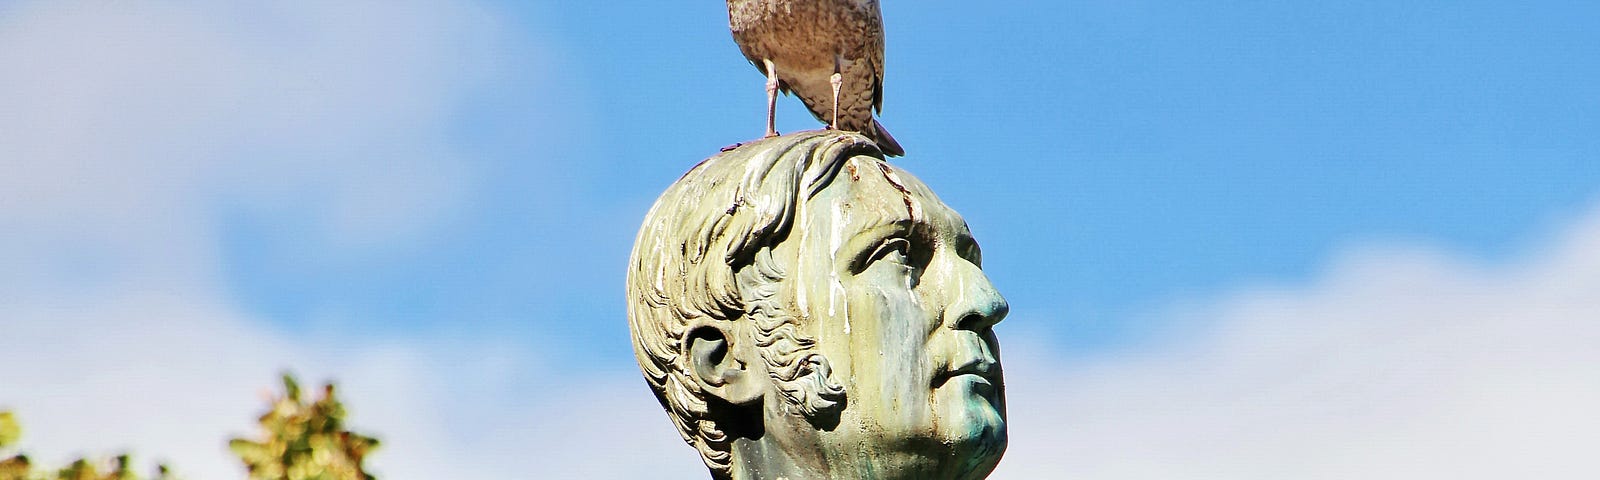 Statue with pigeon perched on its head.